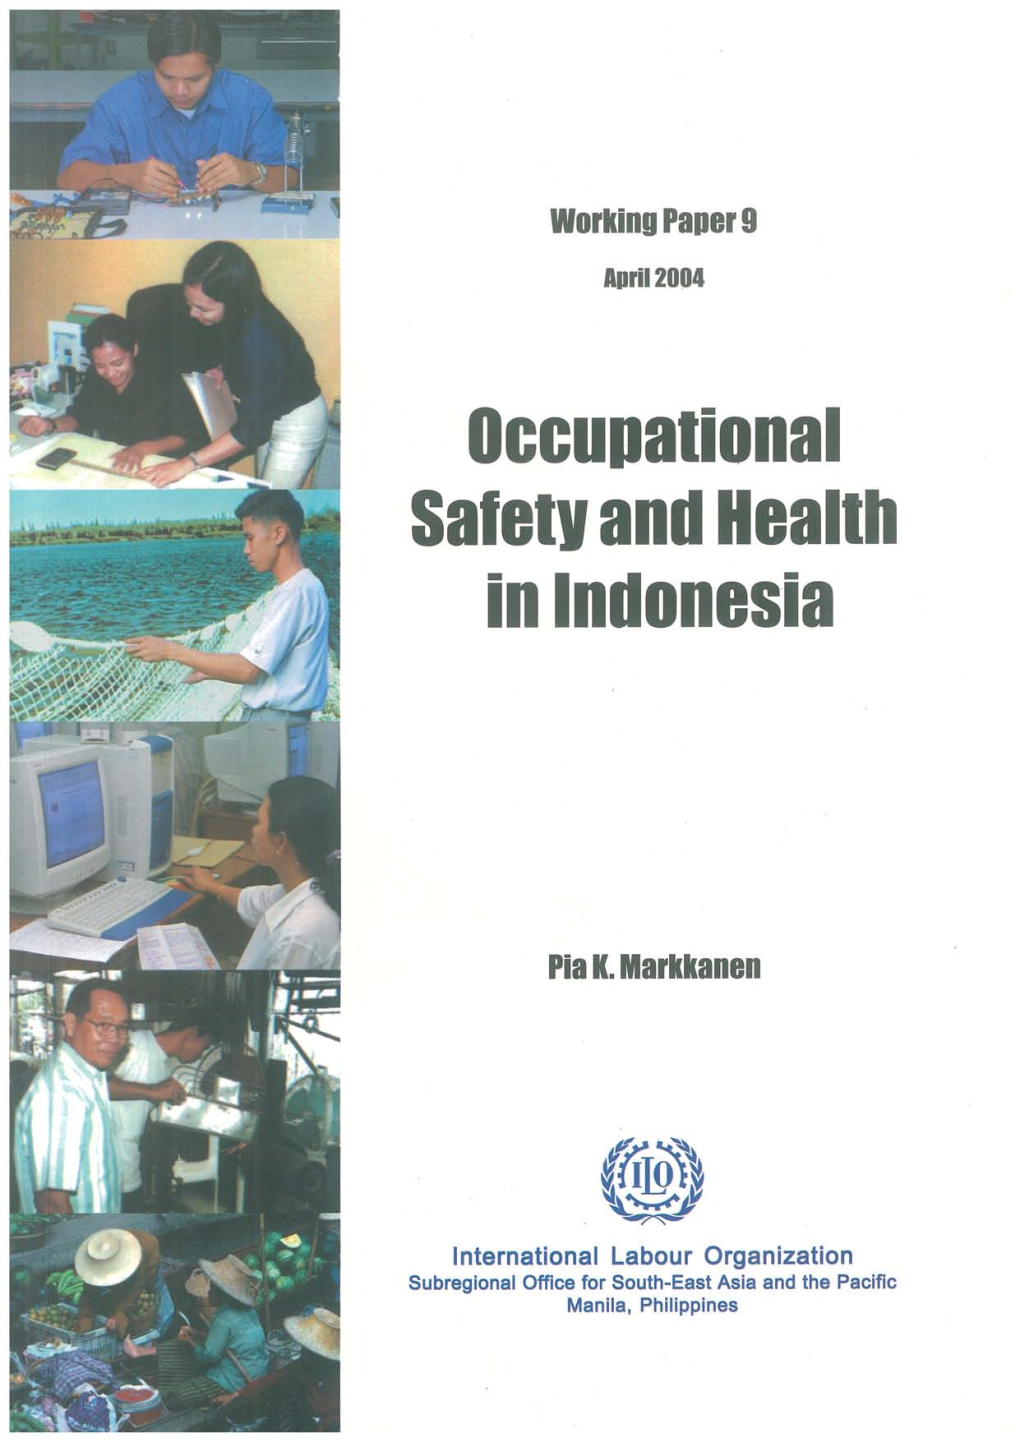 ILO Subregional Office for South-East Asia and the Pacific Working Paper